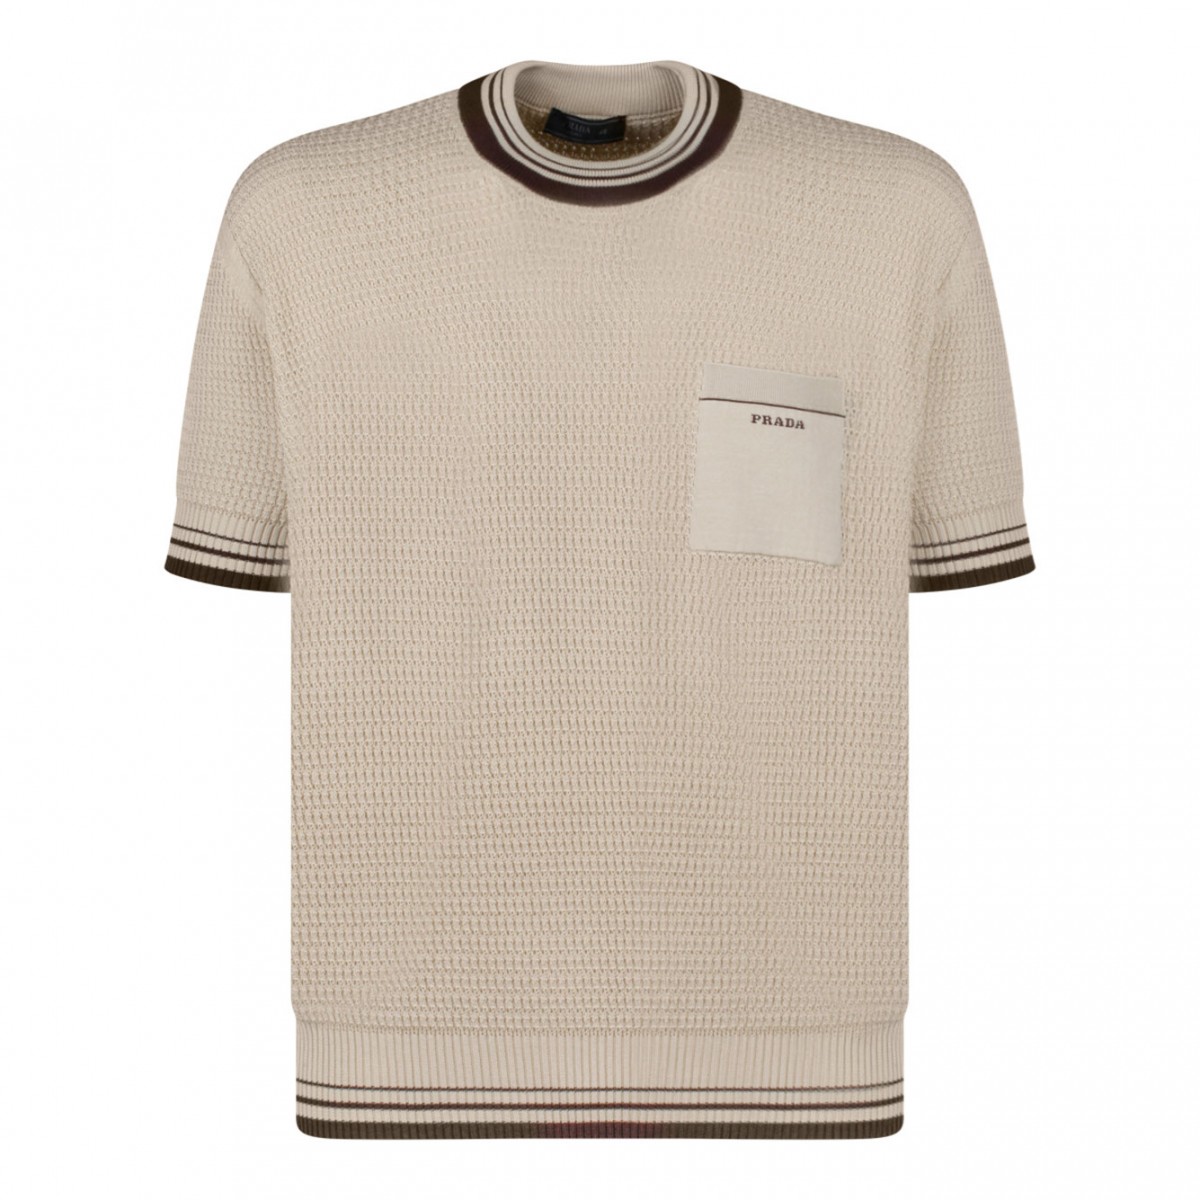 Light Beige and Brown Knitted T-Shirt